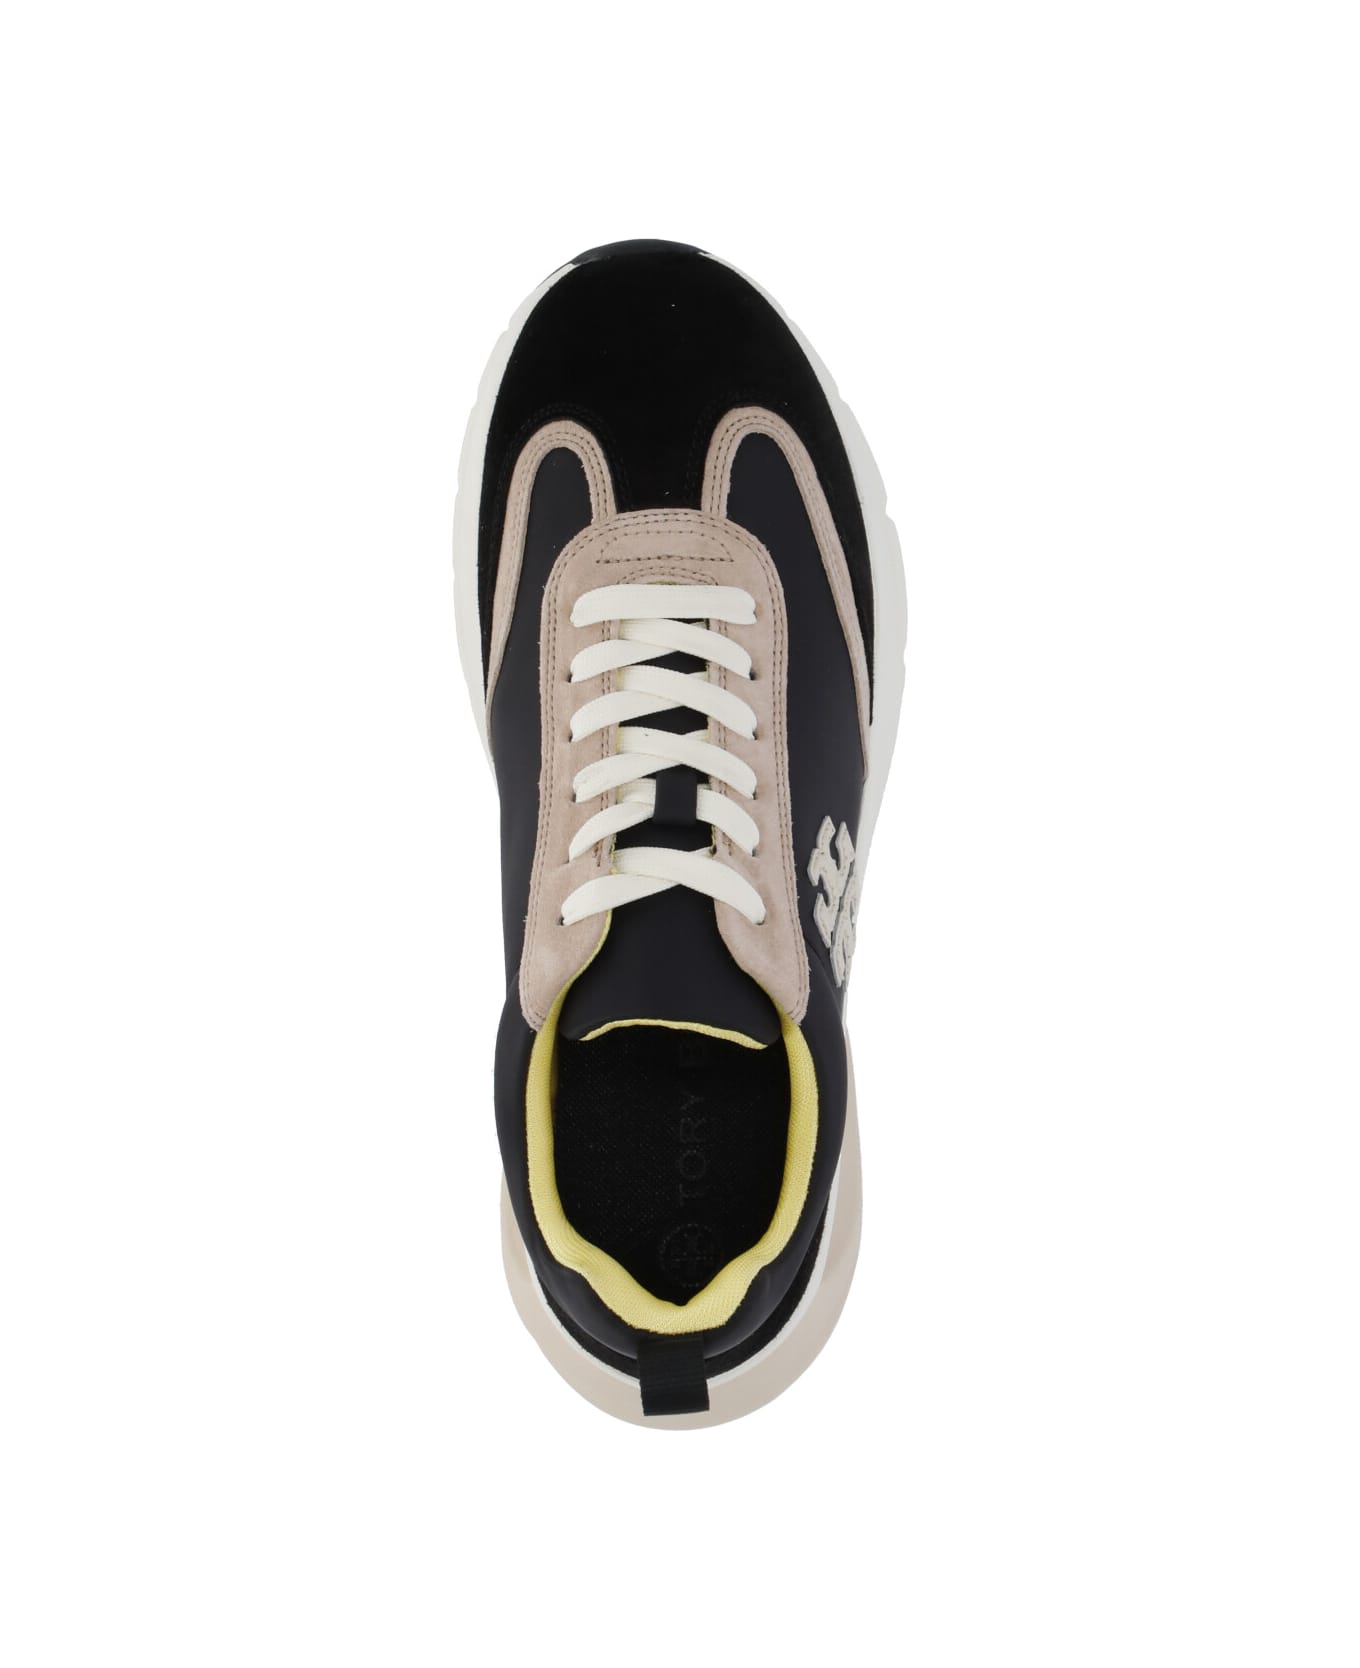 Tory Burch Good Luck Leather Sneakers - Black / Cream / Black